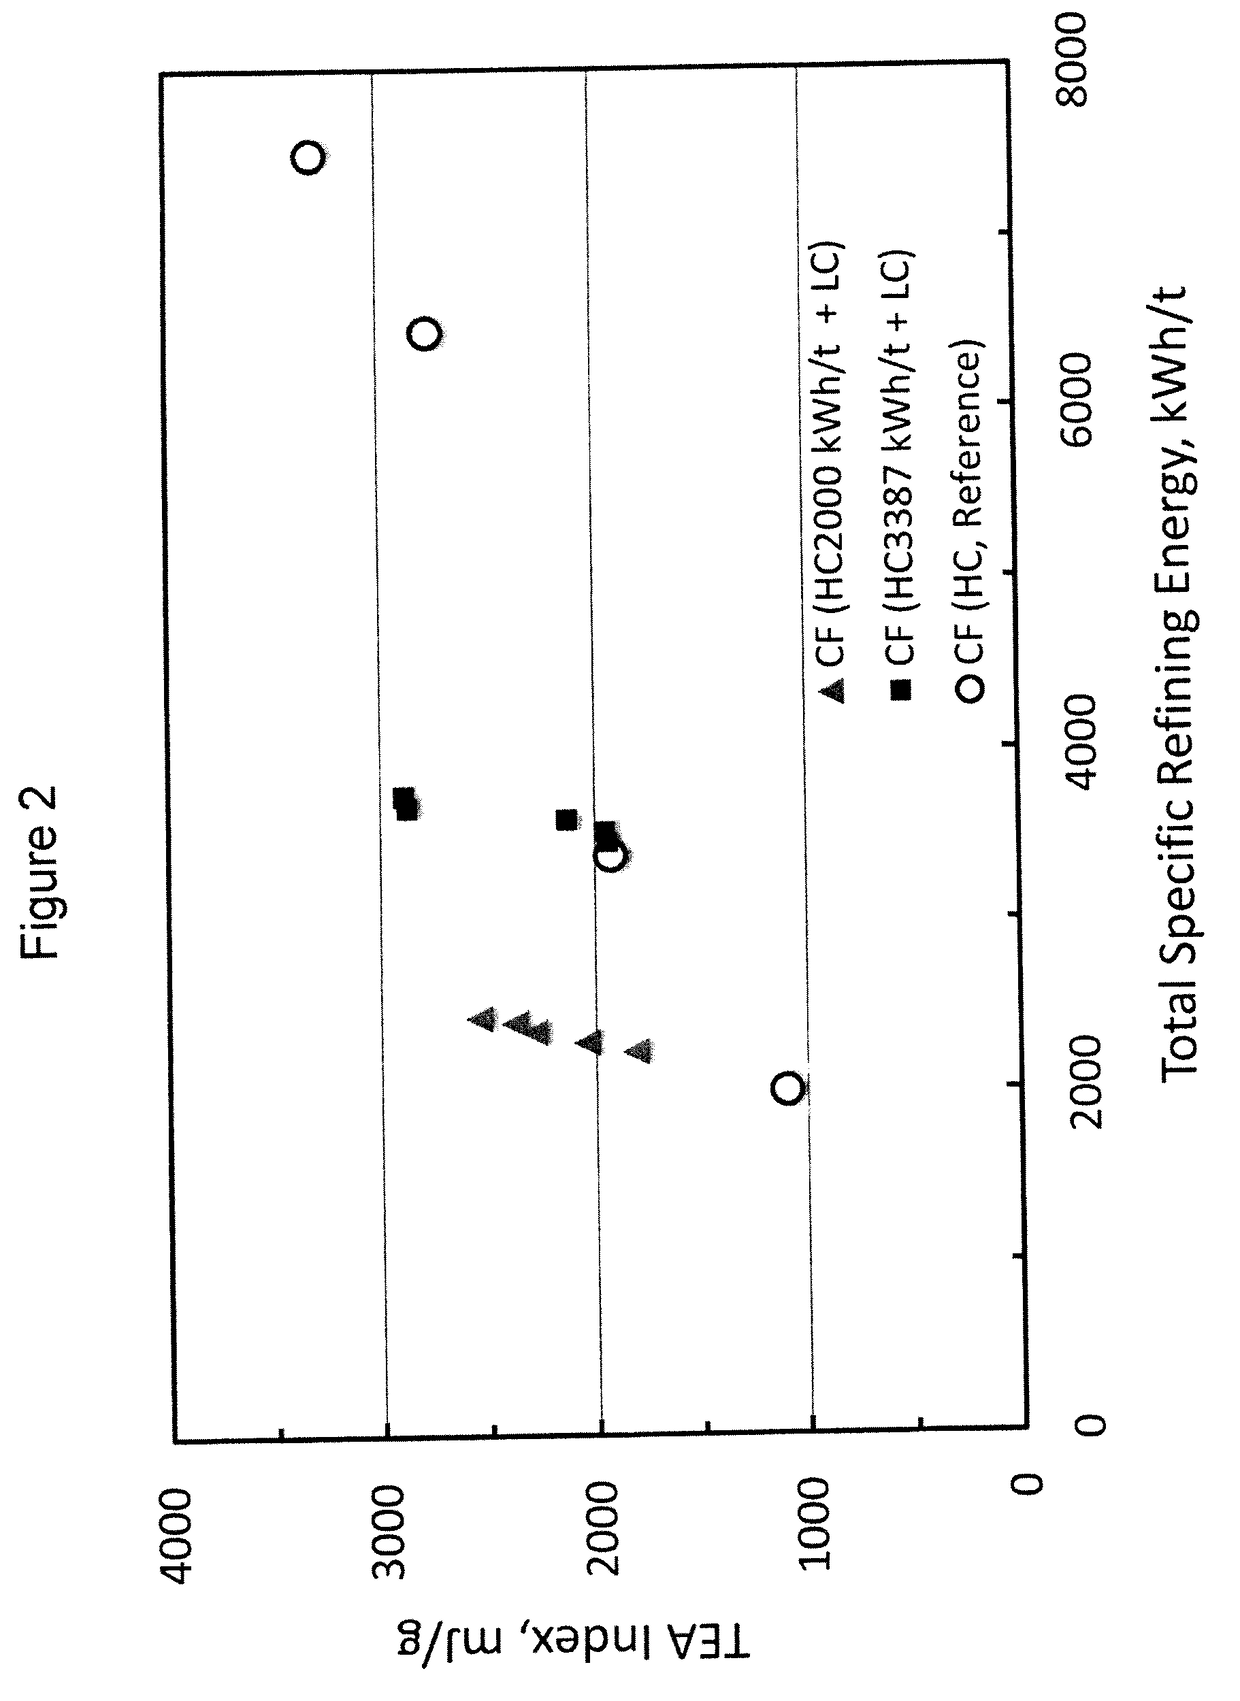 Method for producing cellulose filaments with less refining energy